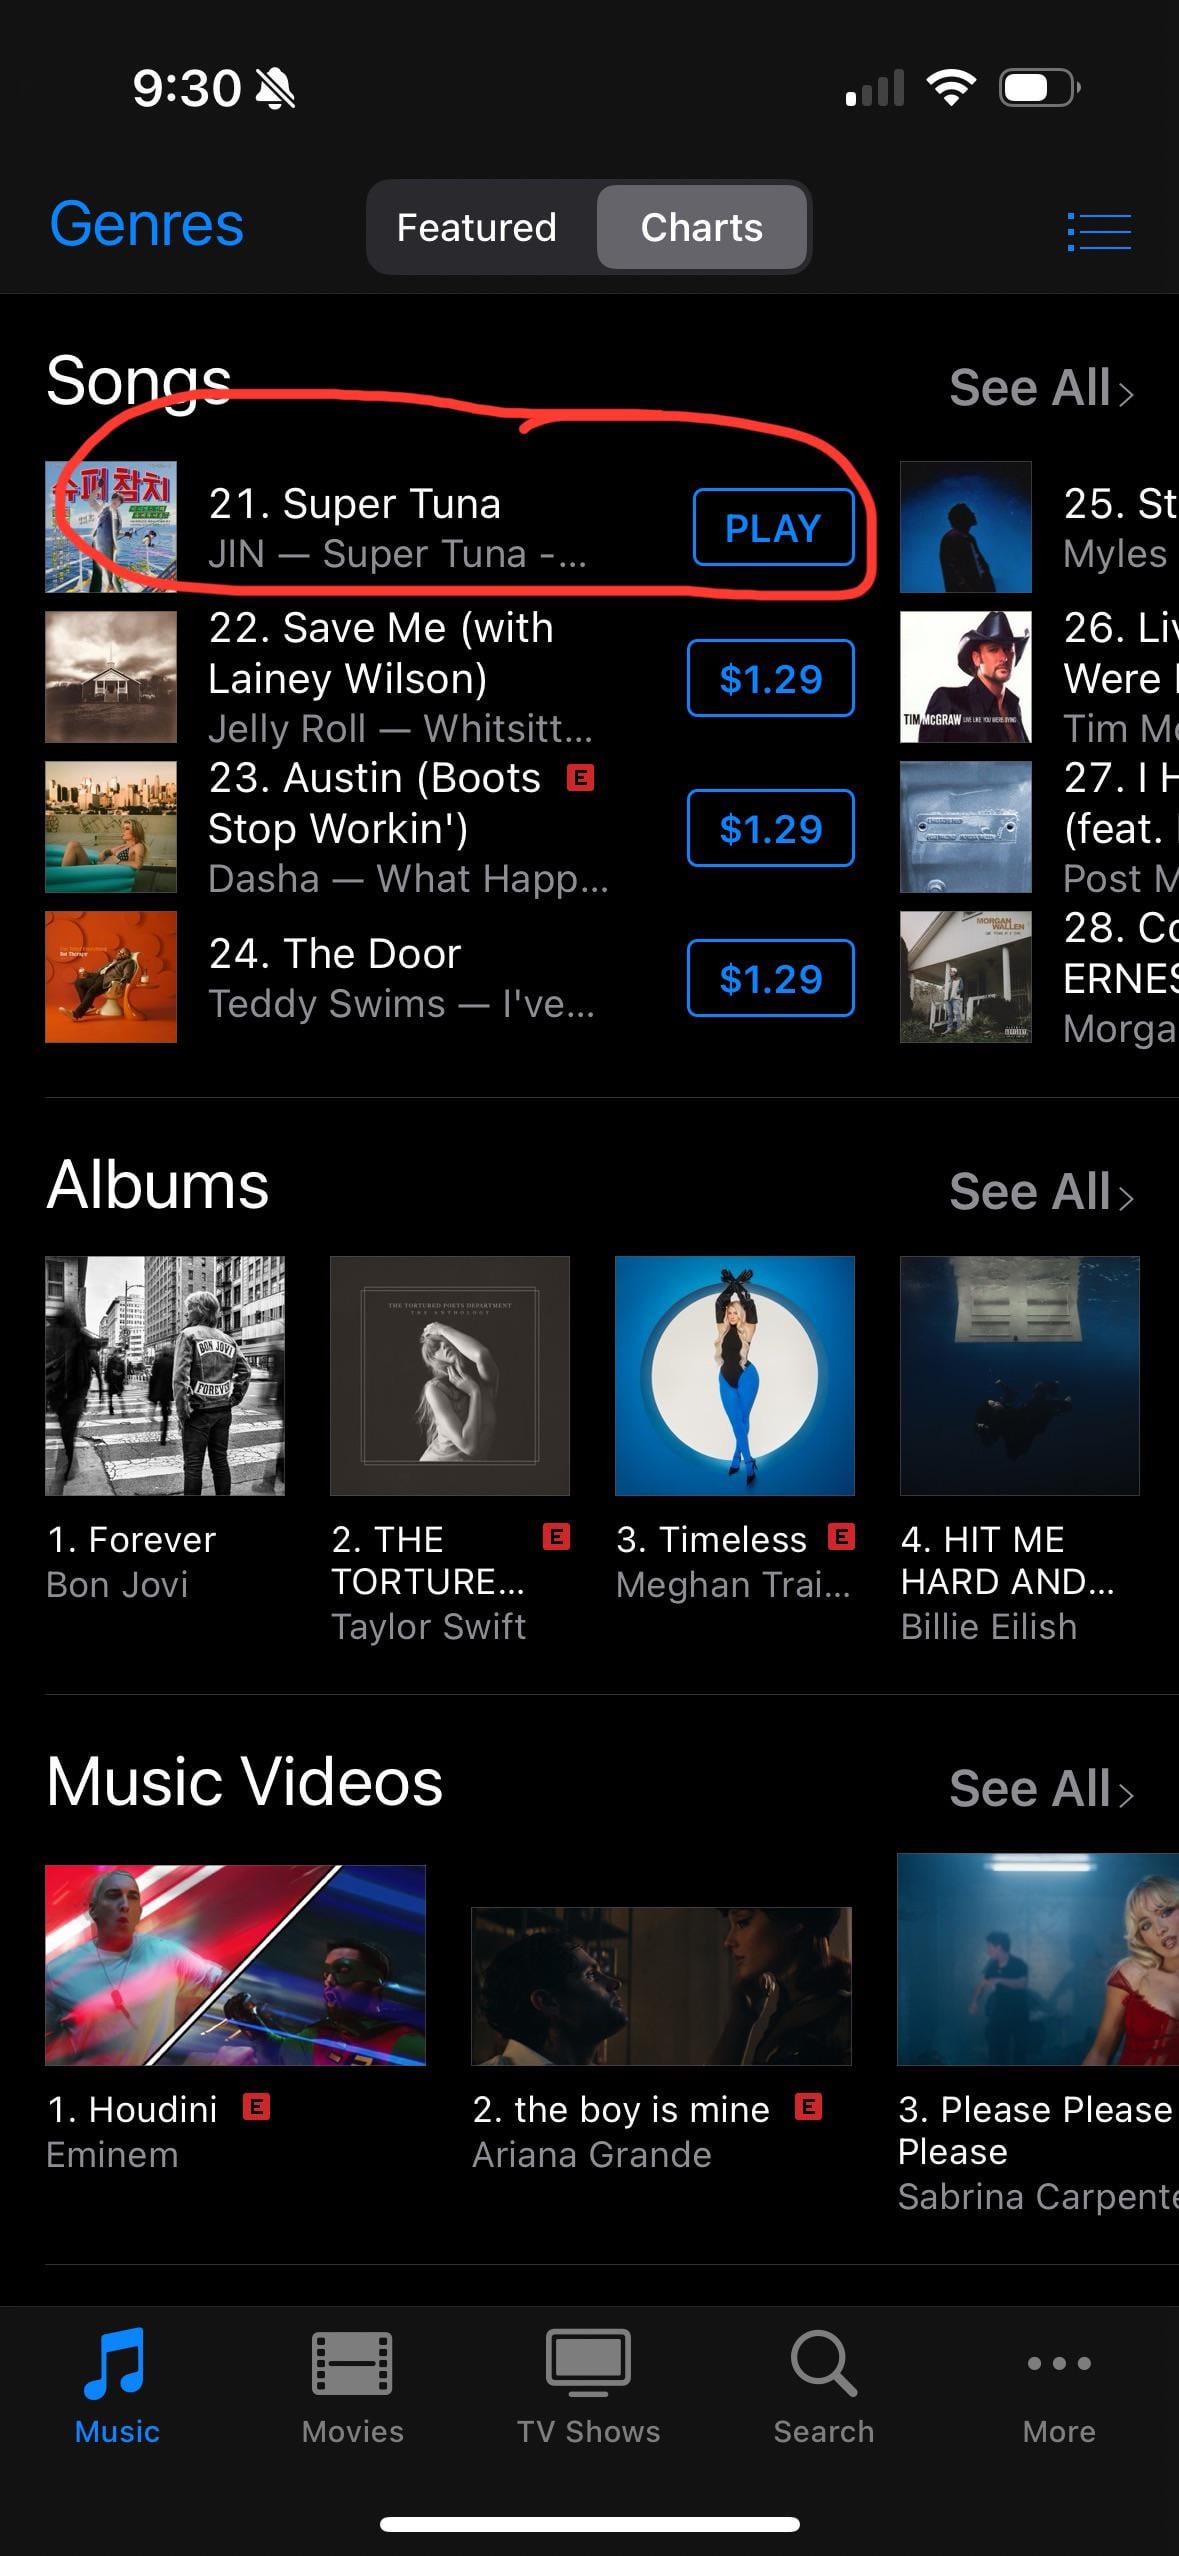 Is army working behind the scenes to get super tuna to #1 on U.S. iTunes? (this was last night)